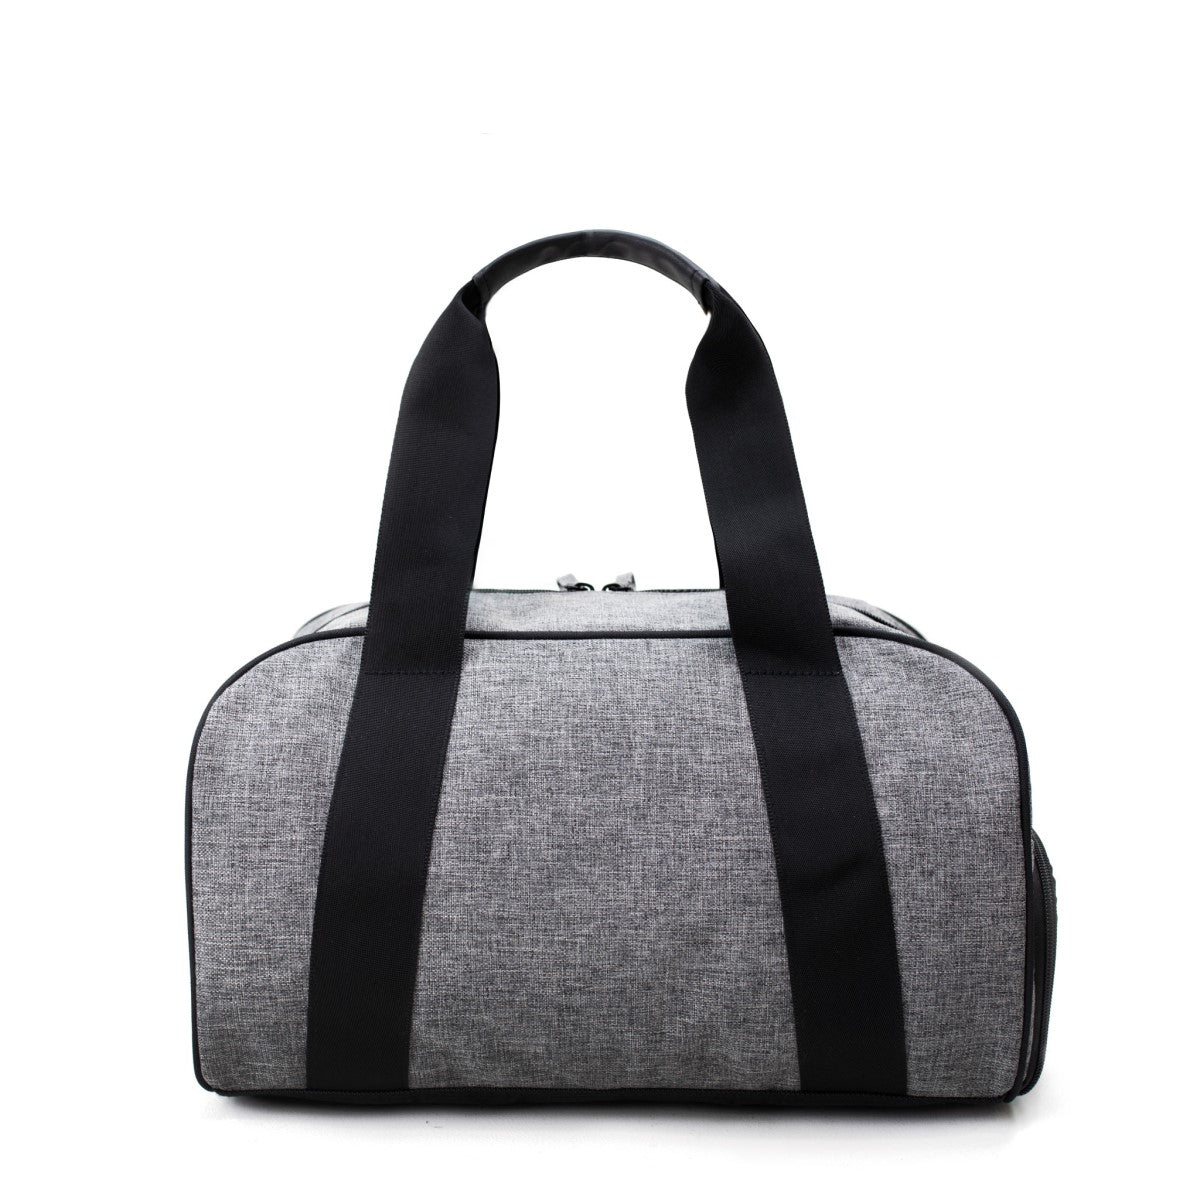 Vooray - Bolso Gym Gris